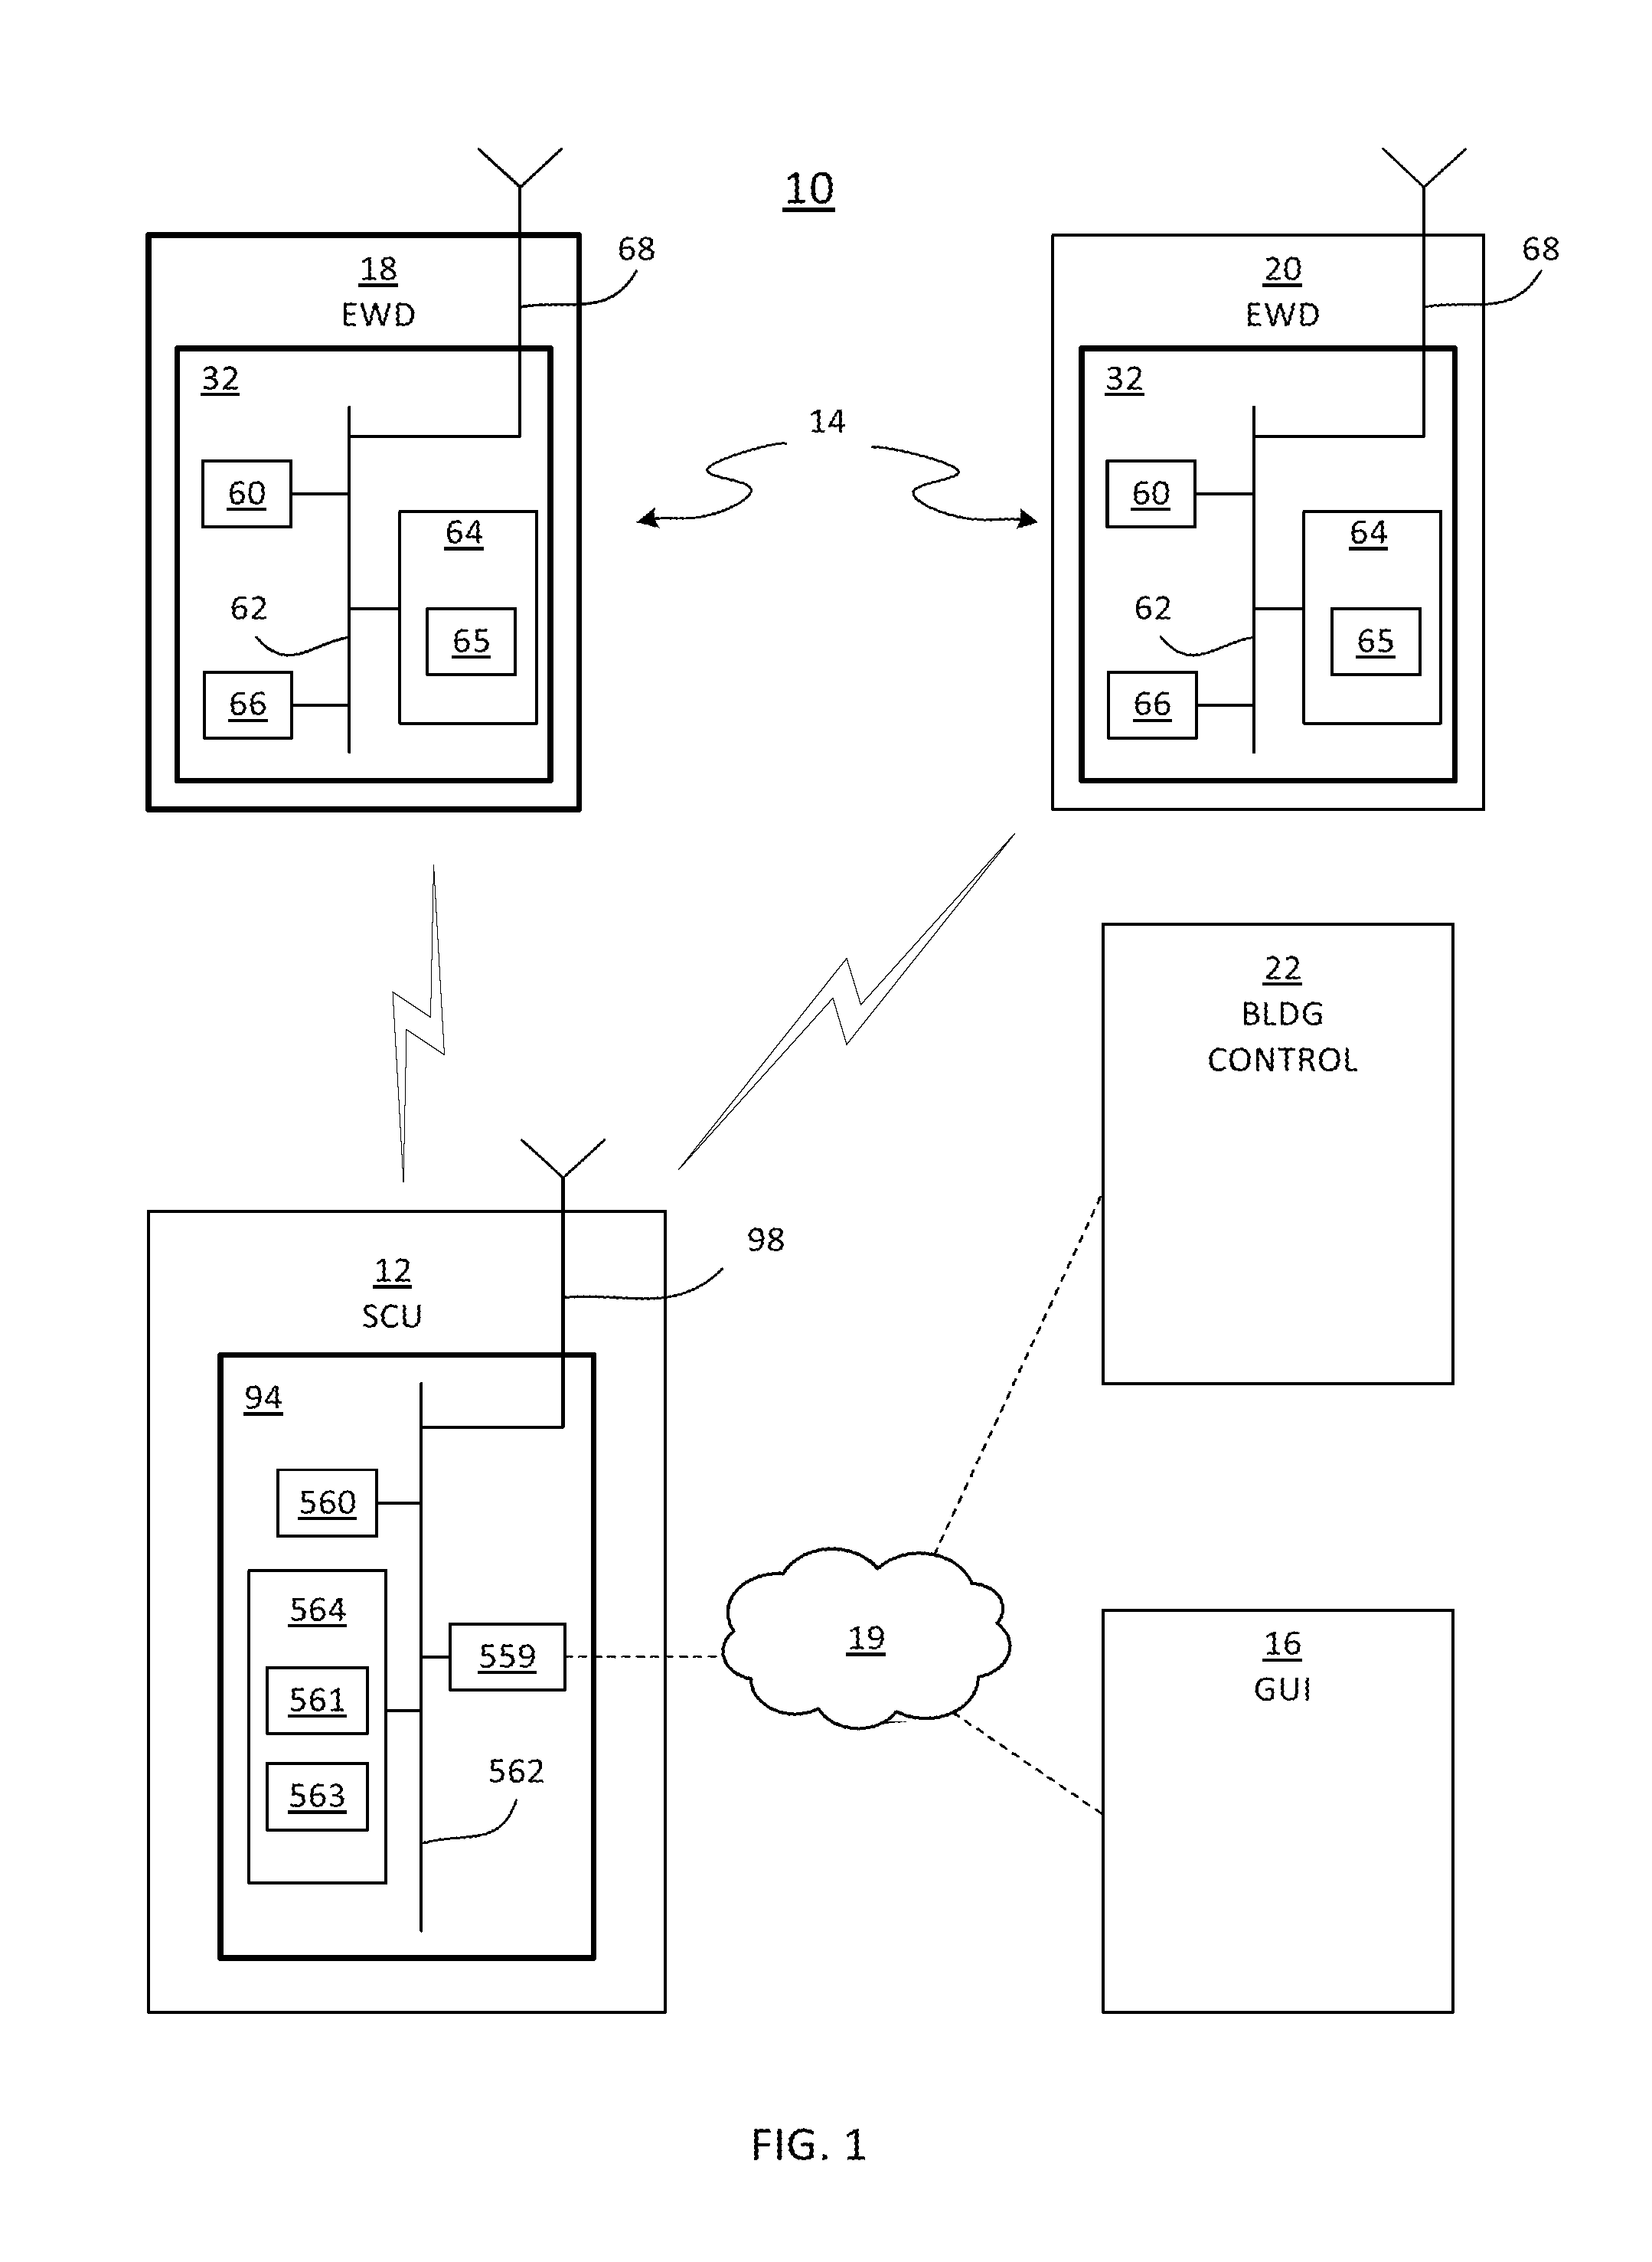 System for building management of electricity via network control of point-of-use devices